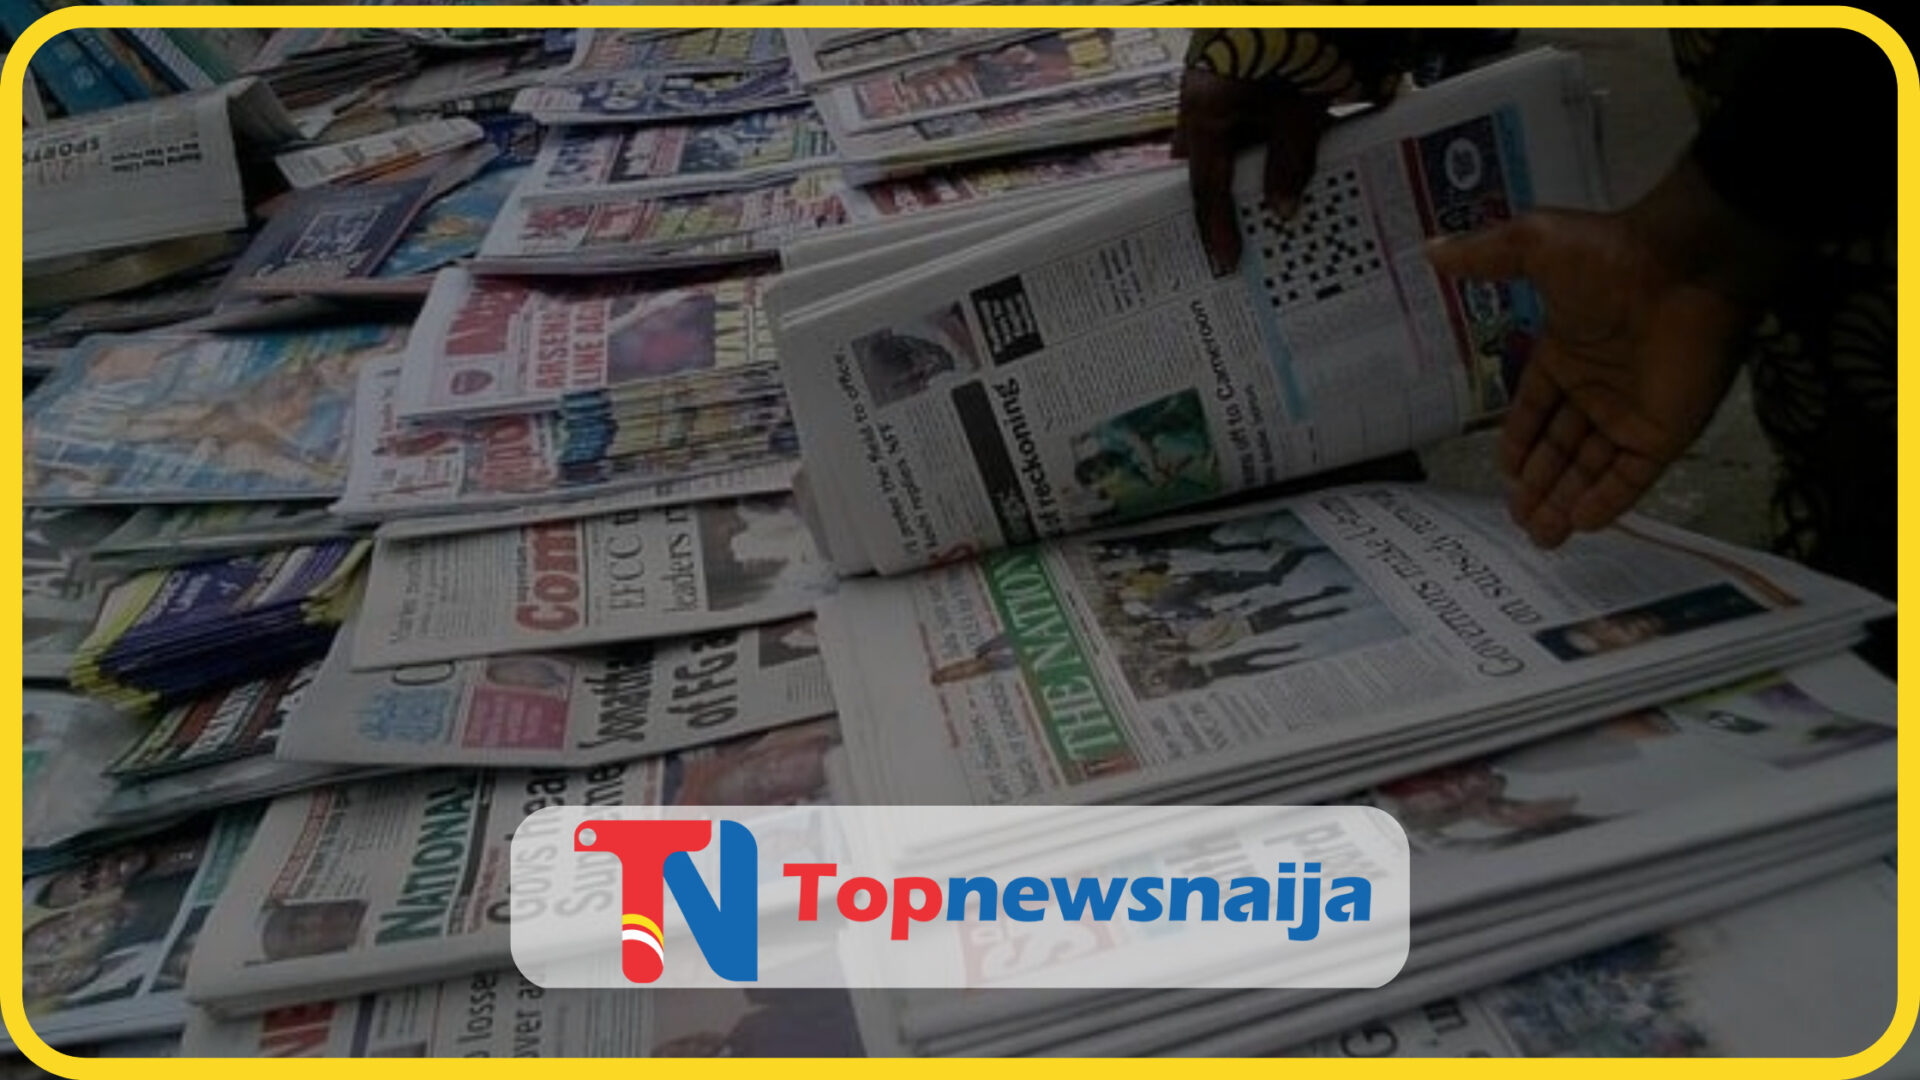 Nigerian Newspapers Daily Front Pages on Topnewsnaija